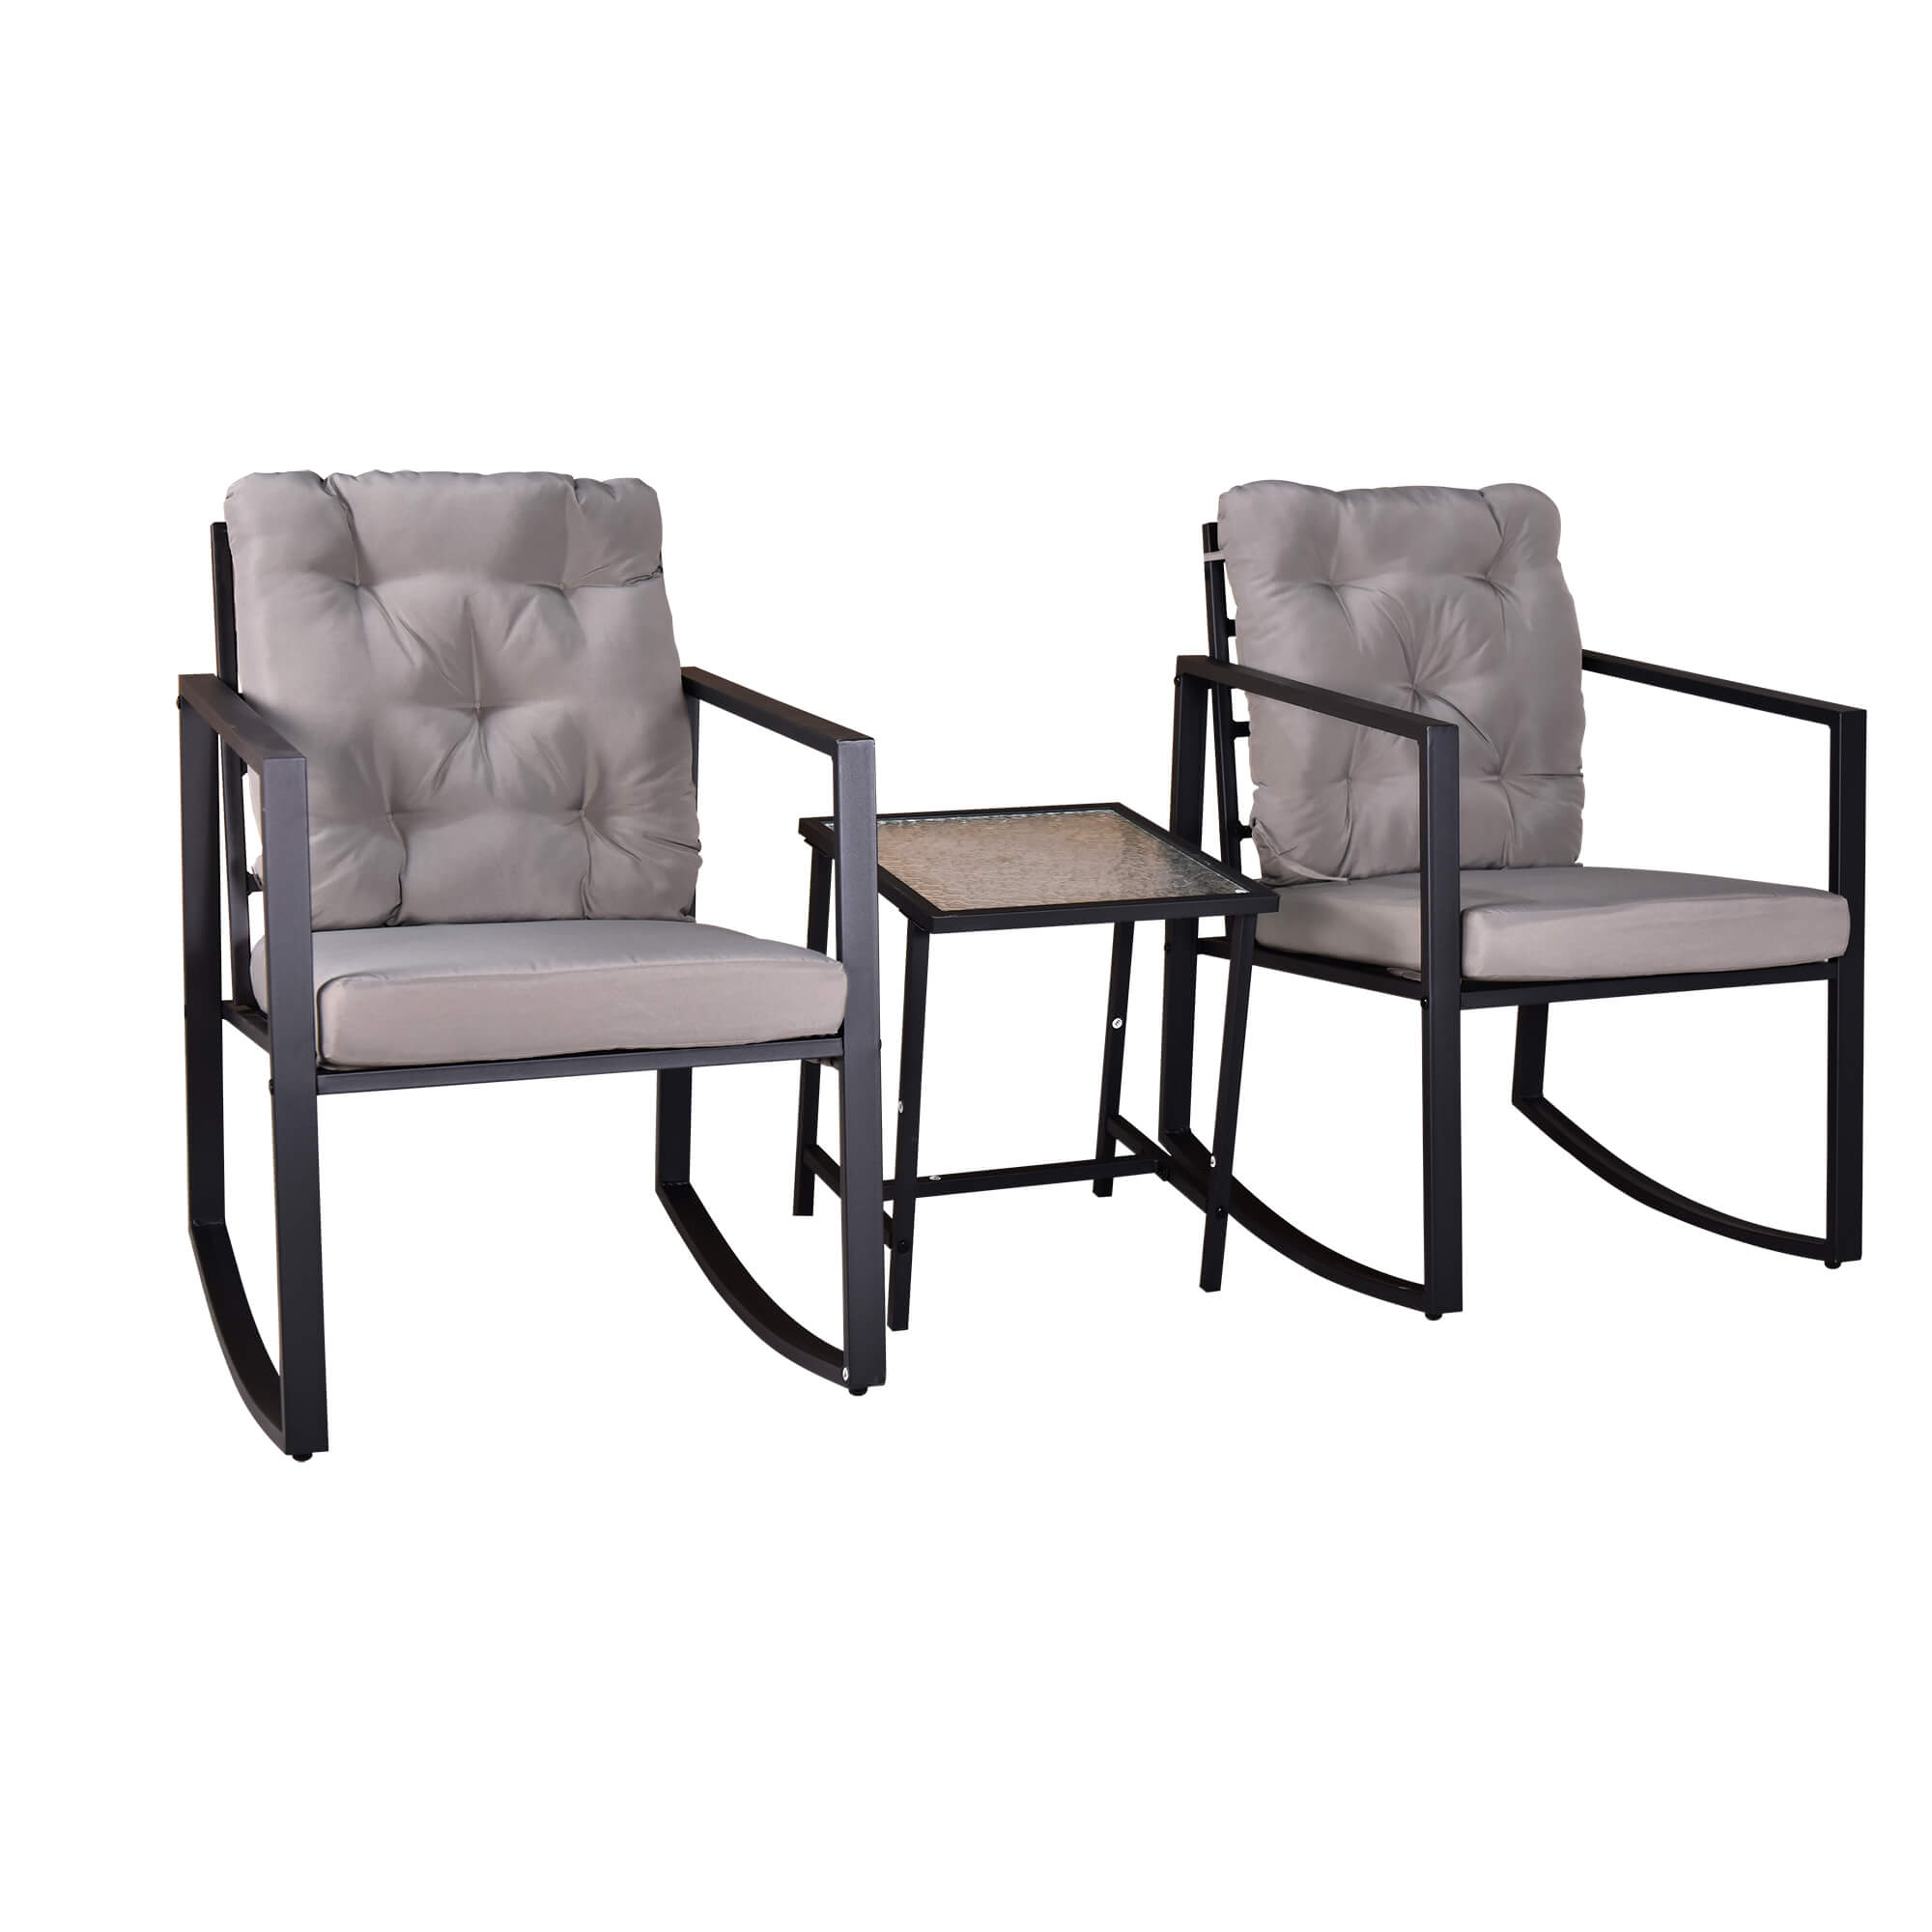 3 Pieces Patio Set Outdoor Patio Furniture Sets with Coffee Table for Yard and Bistro (Gray)